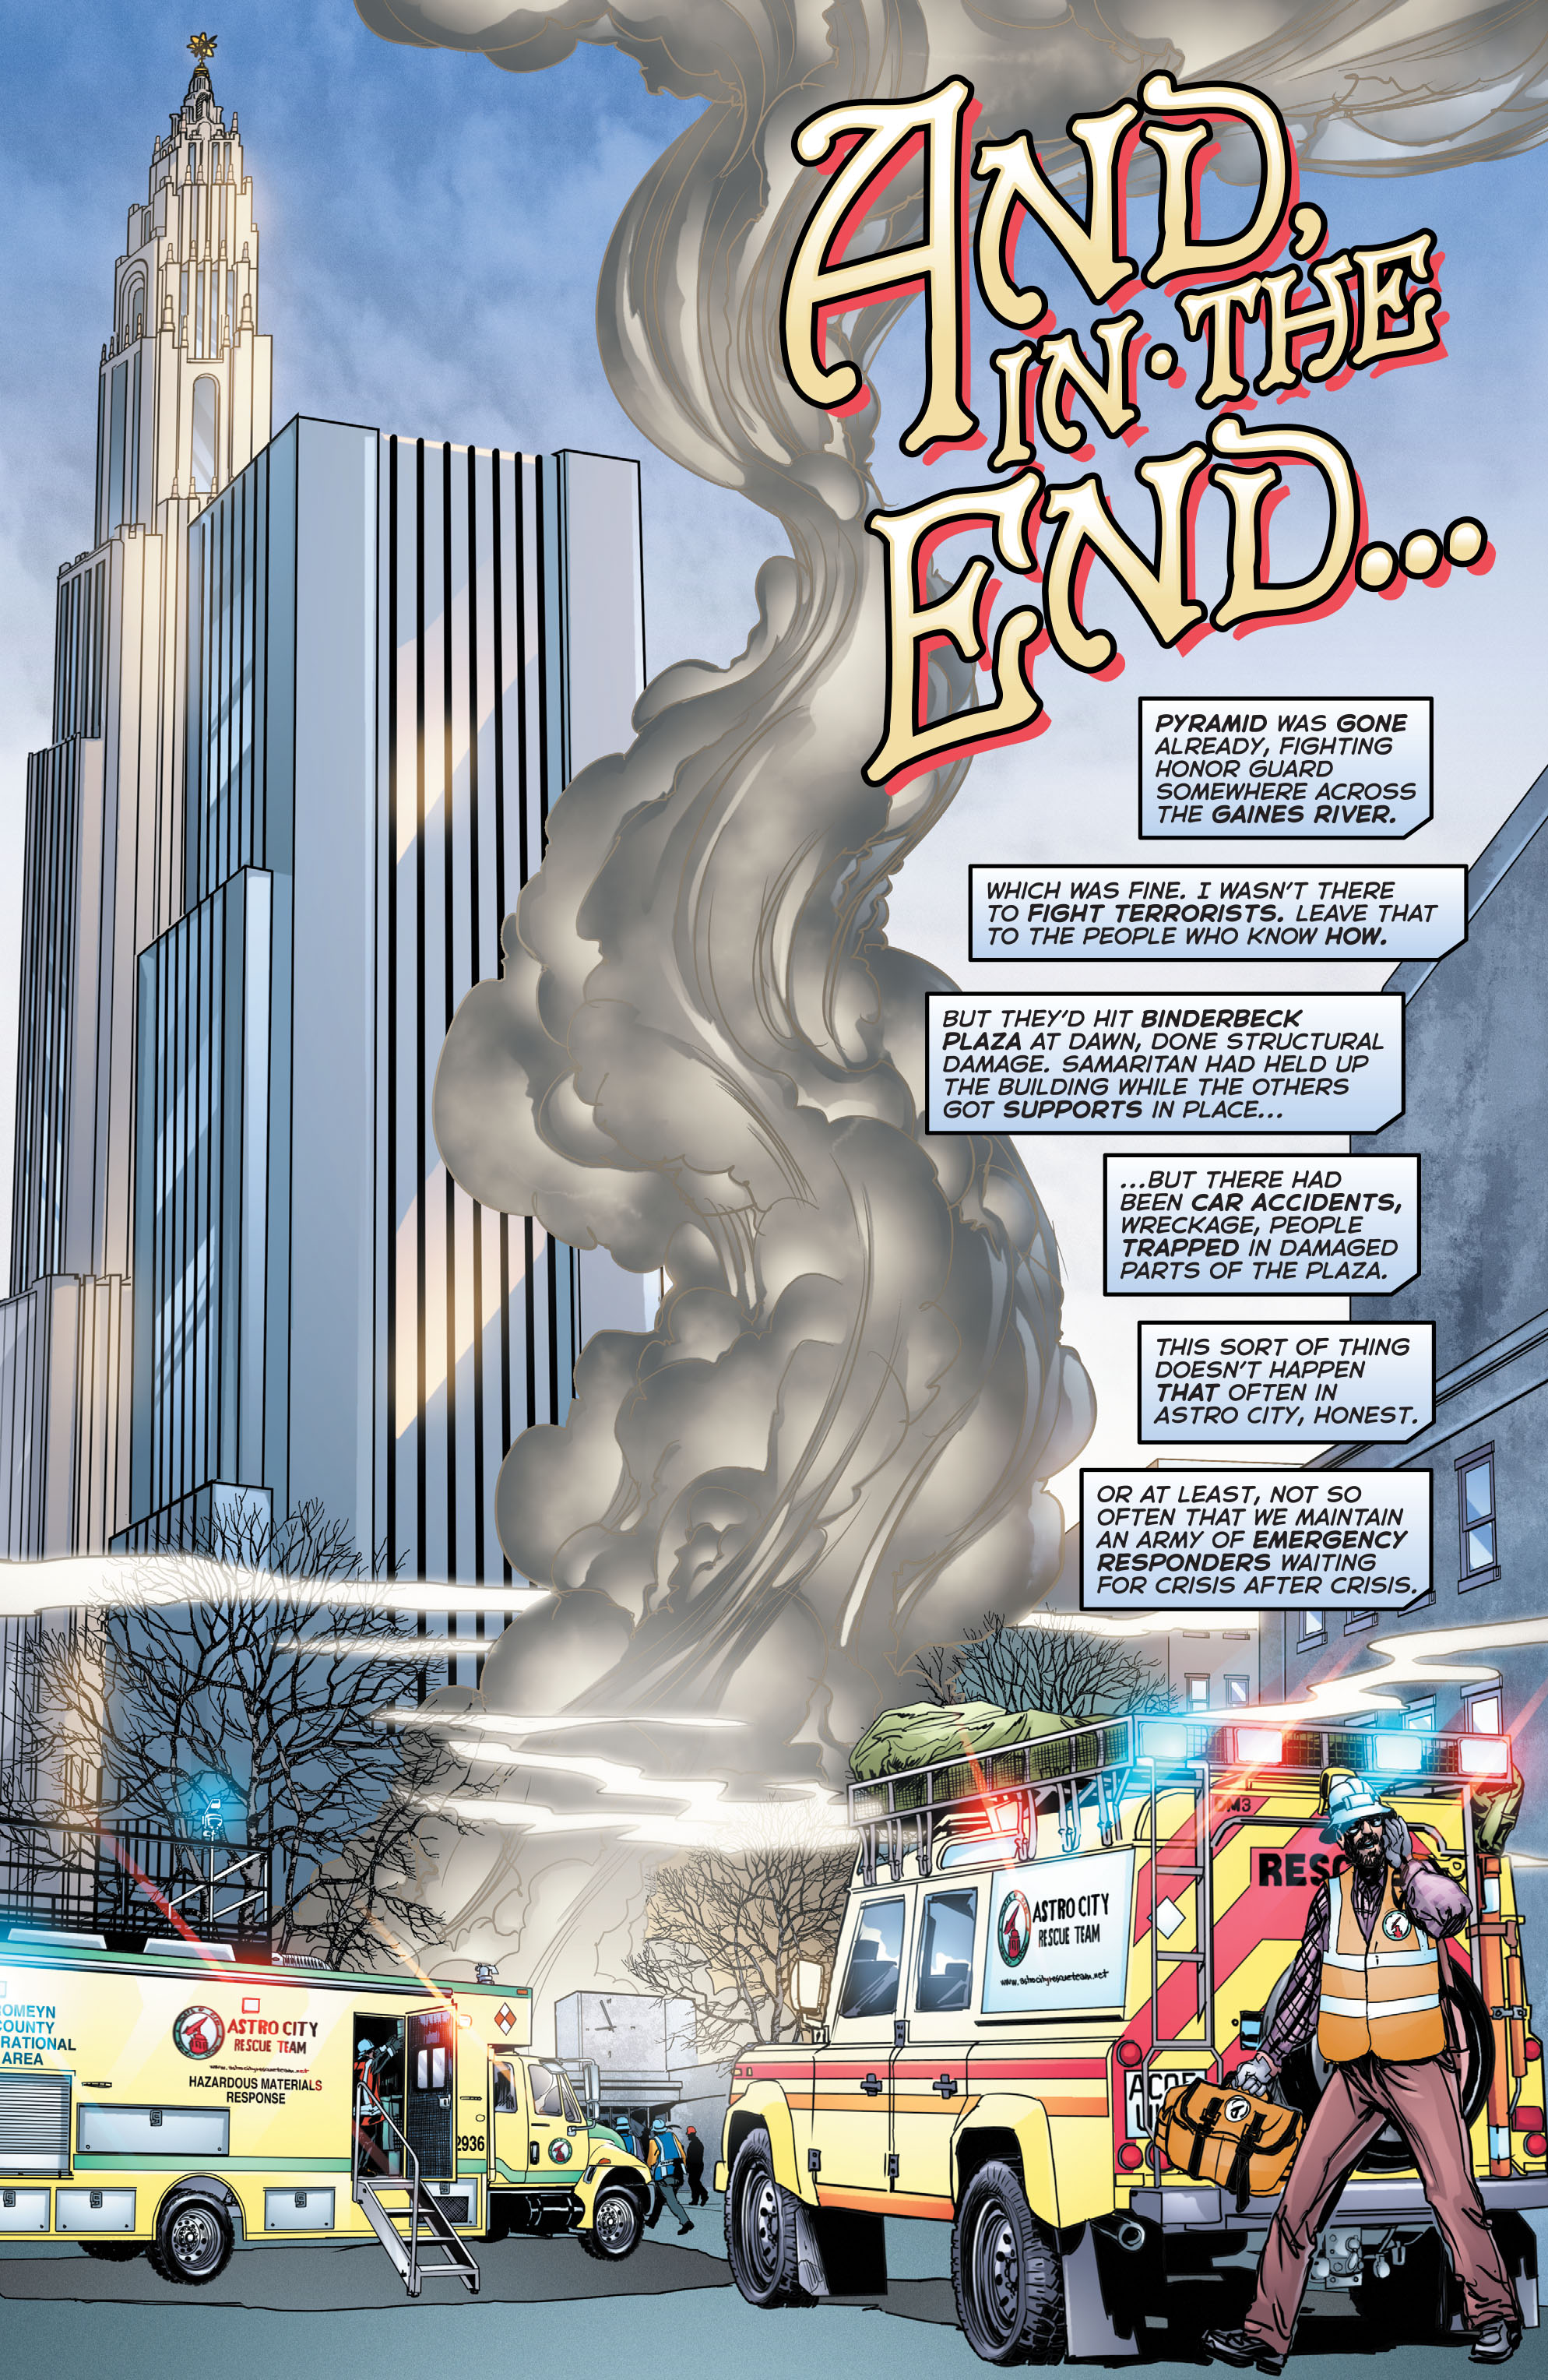 Astro City (2013-): Chapter 52 - Page 2